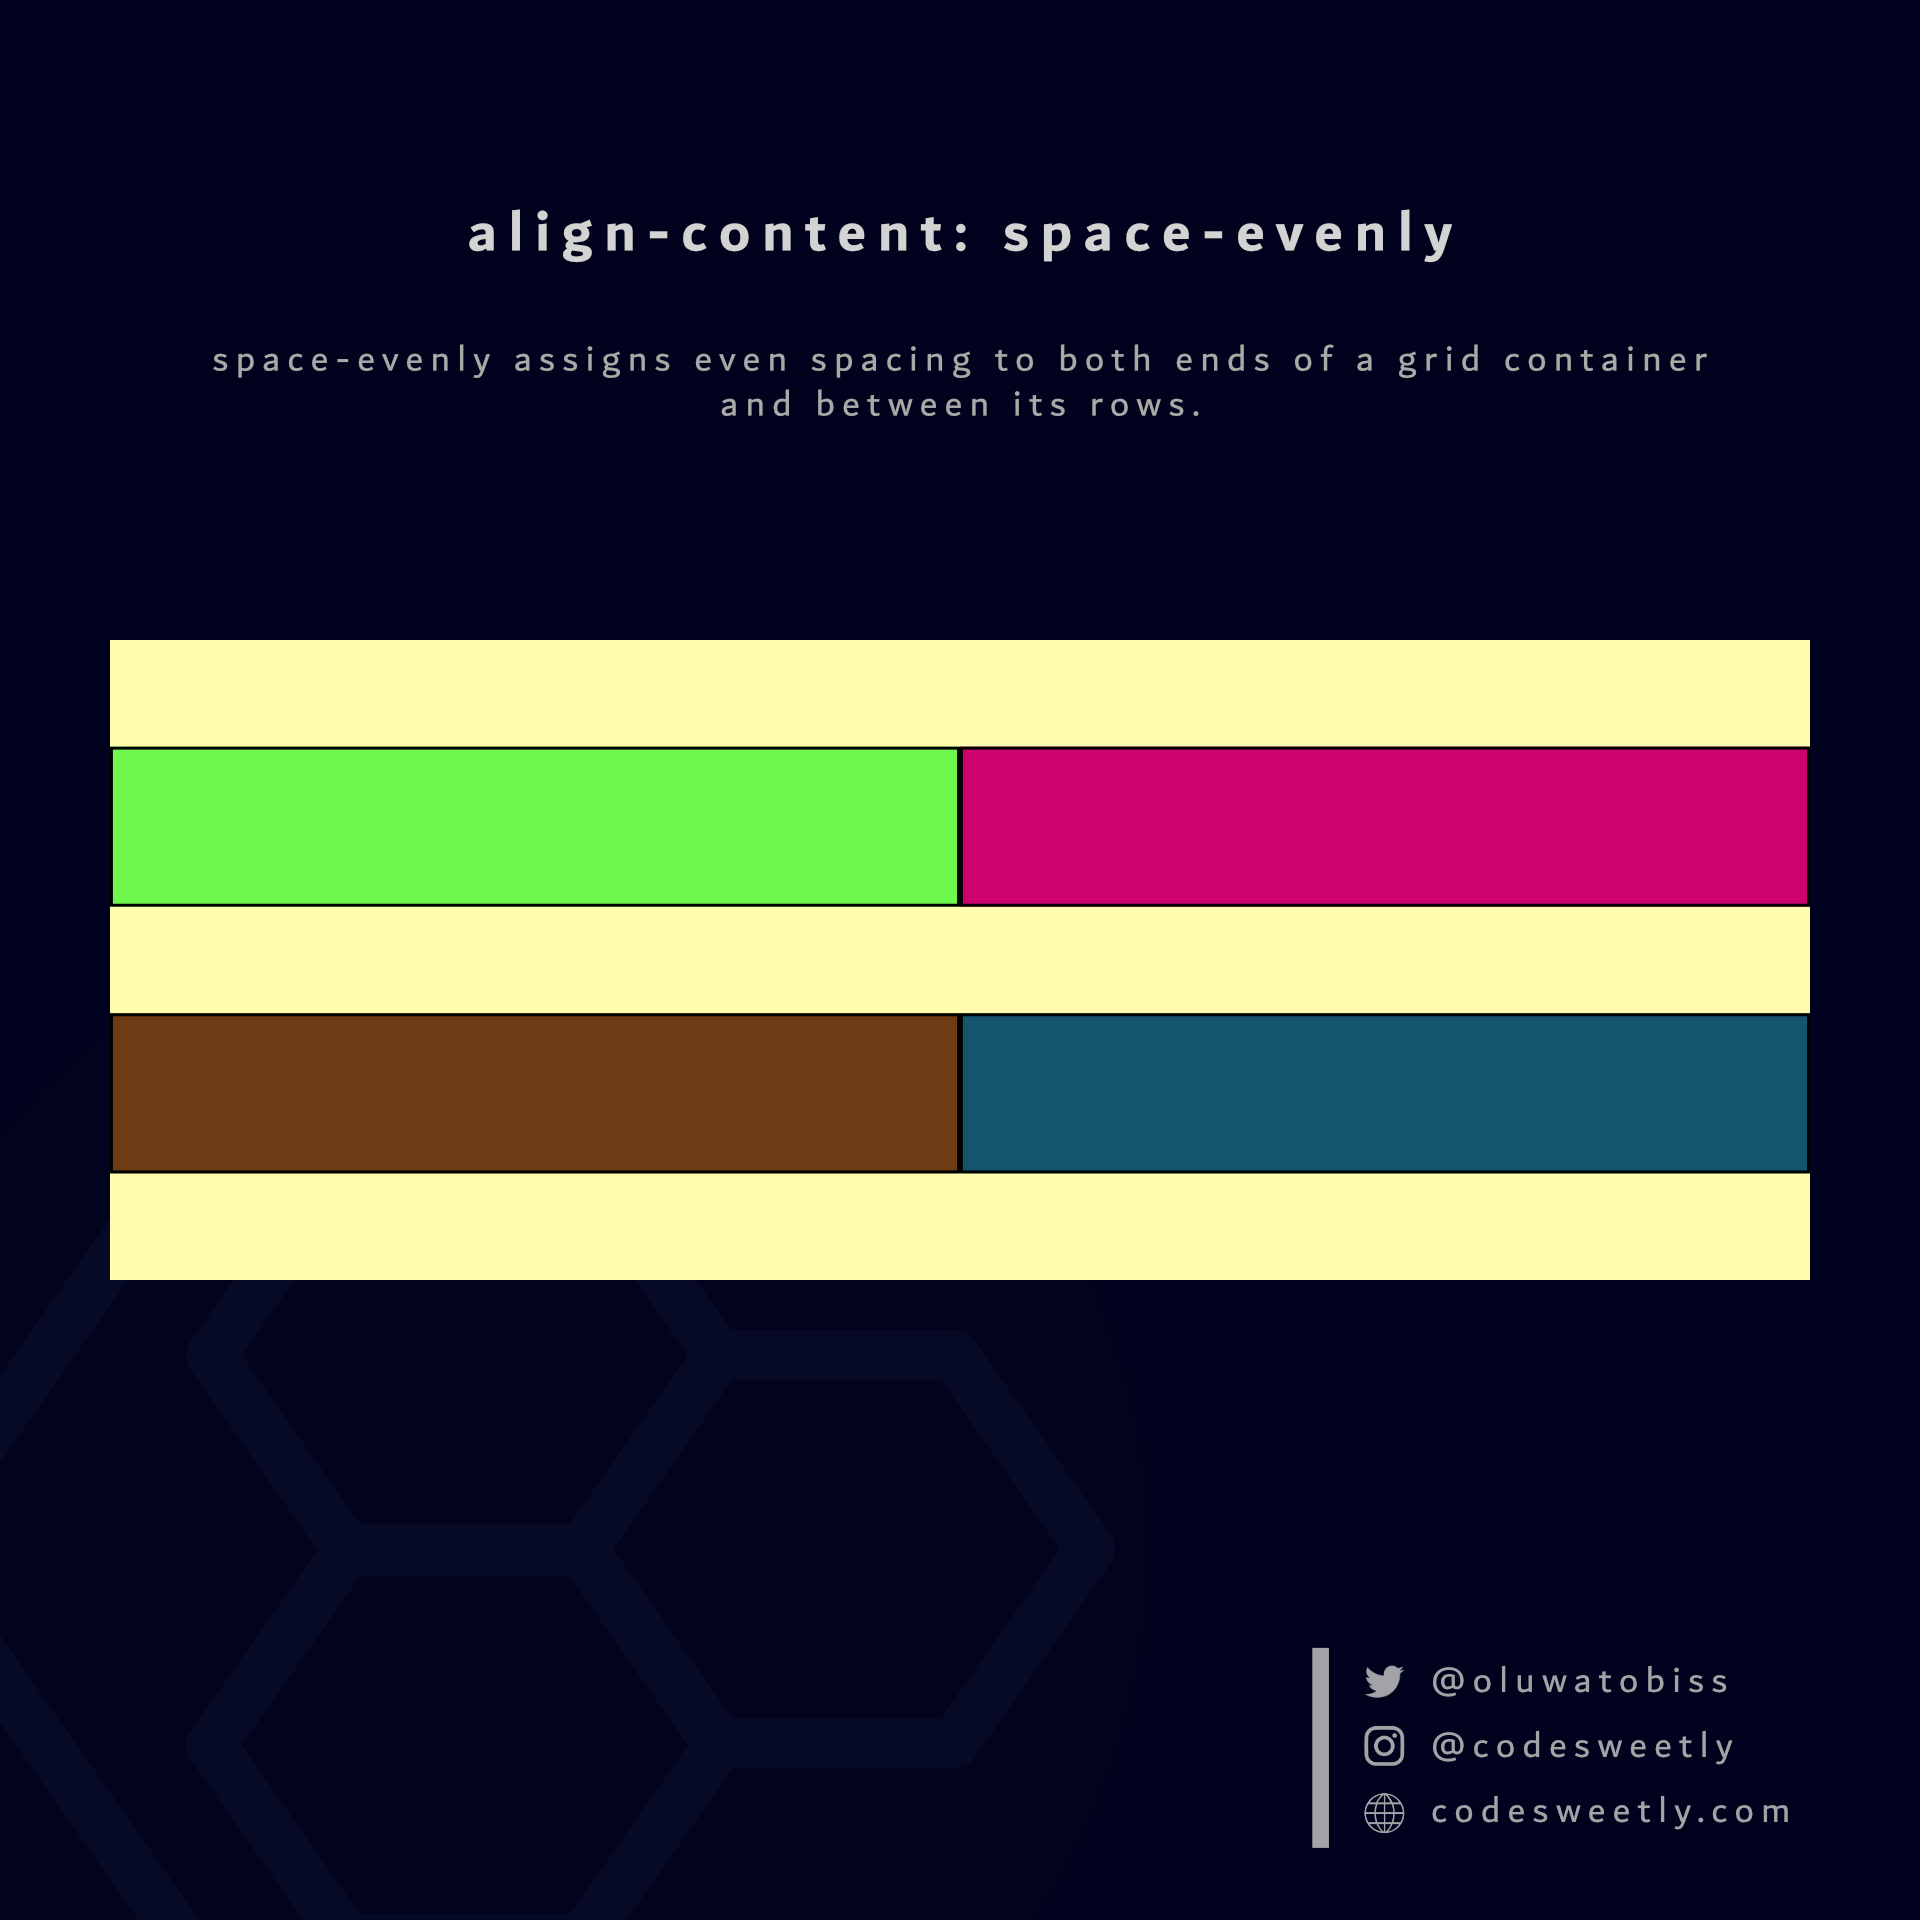 Illustration of align-content's space-evenly value in CSS Grid